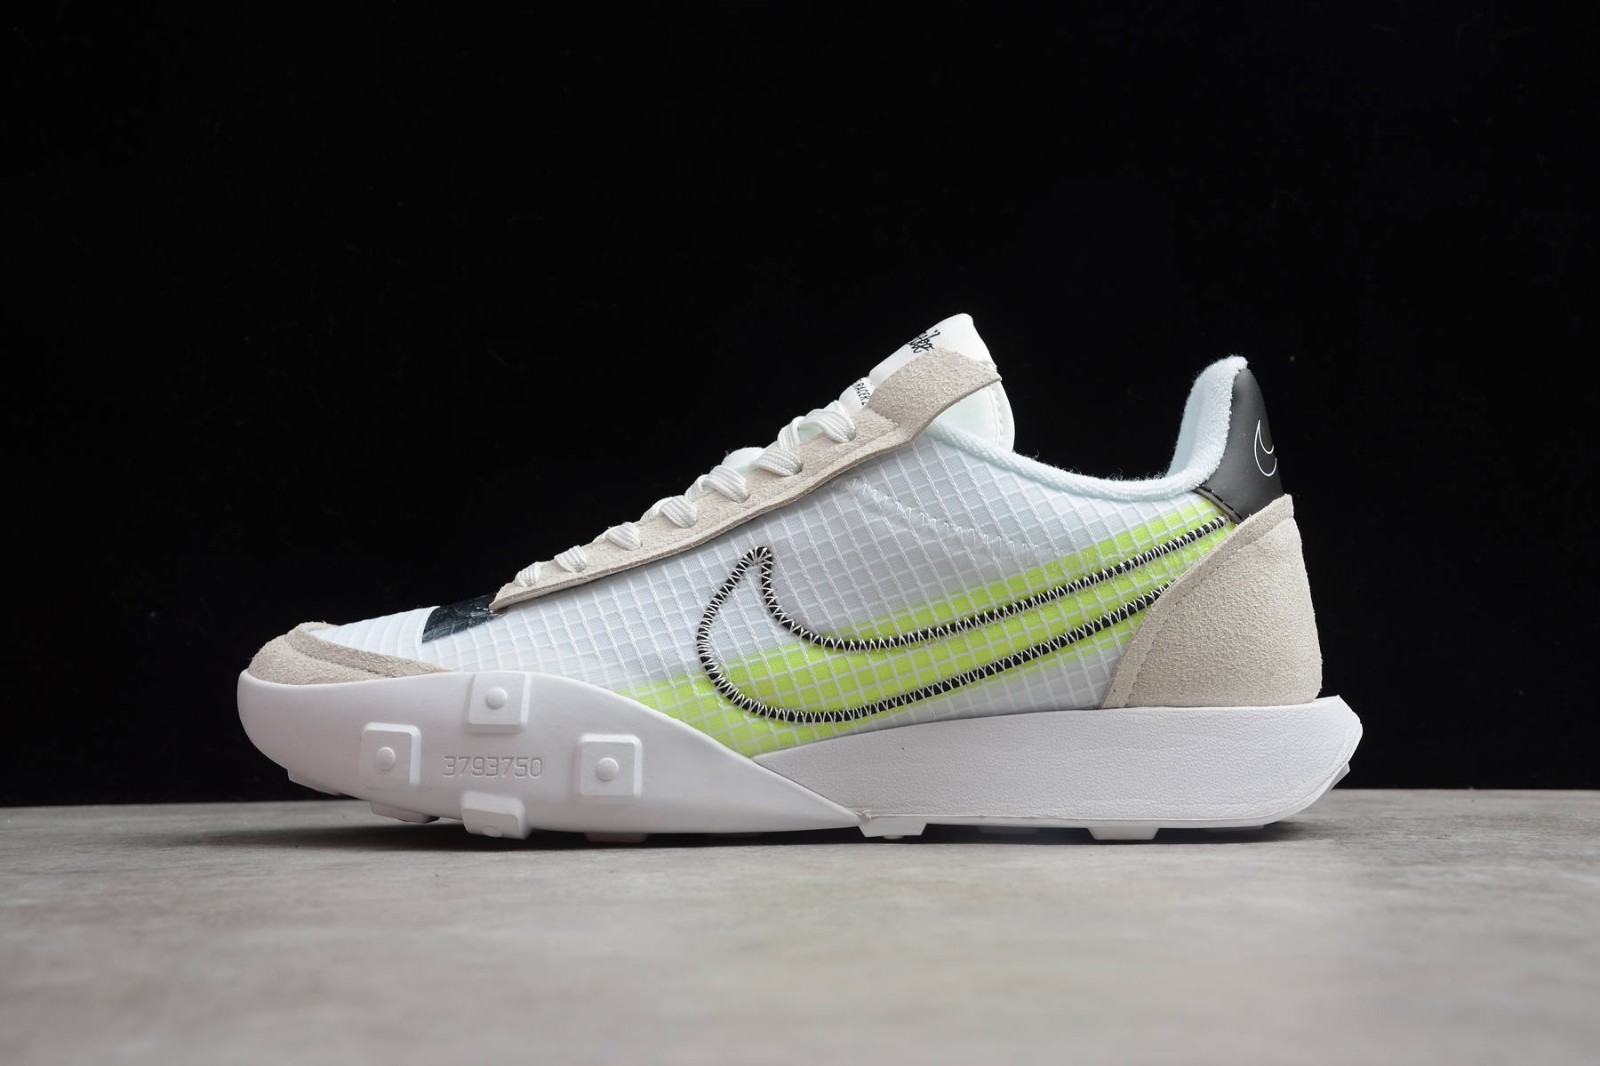 Familiar cortina evitar Adidas CEO Throws Shade at Nike s self-lacing sneakers - GmarShops - 100 -  2020 New Release Nike Waffle Racer 2.0 White Fluorescent Green Classic  Running Shoes CK6647